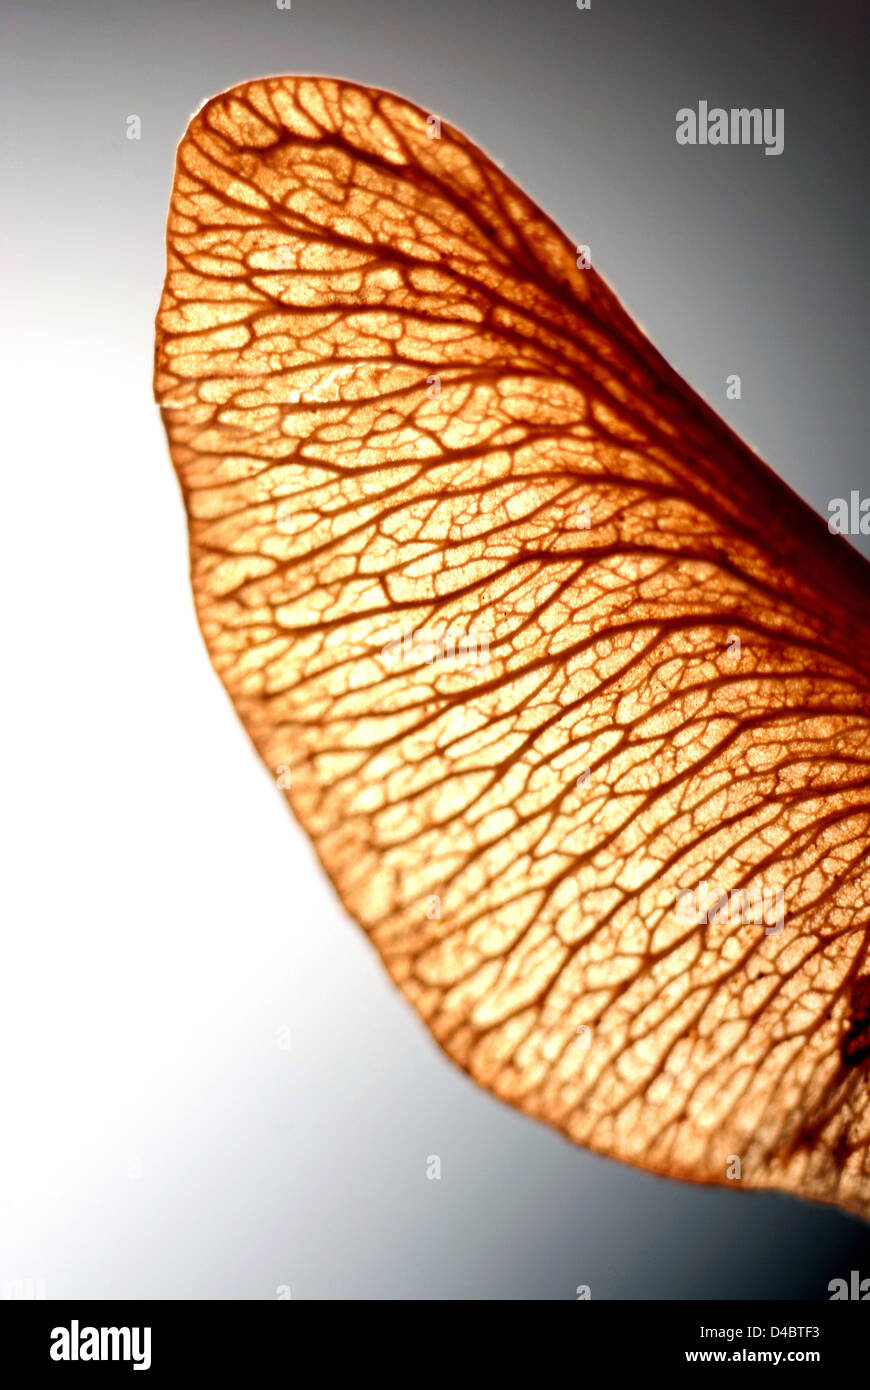 Winged Sycamore seed Stock Photo